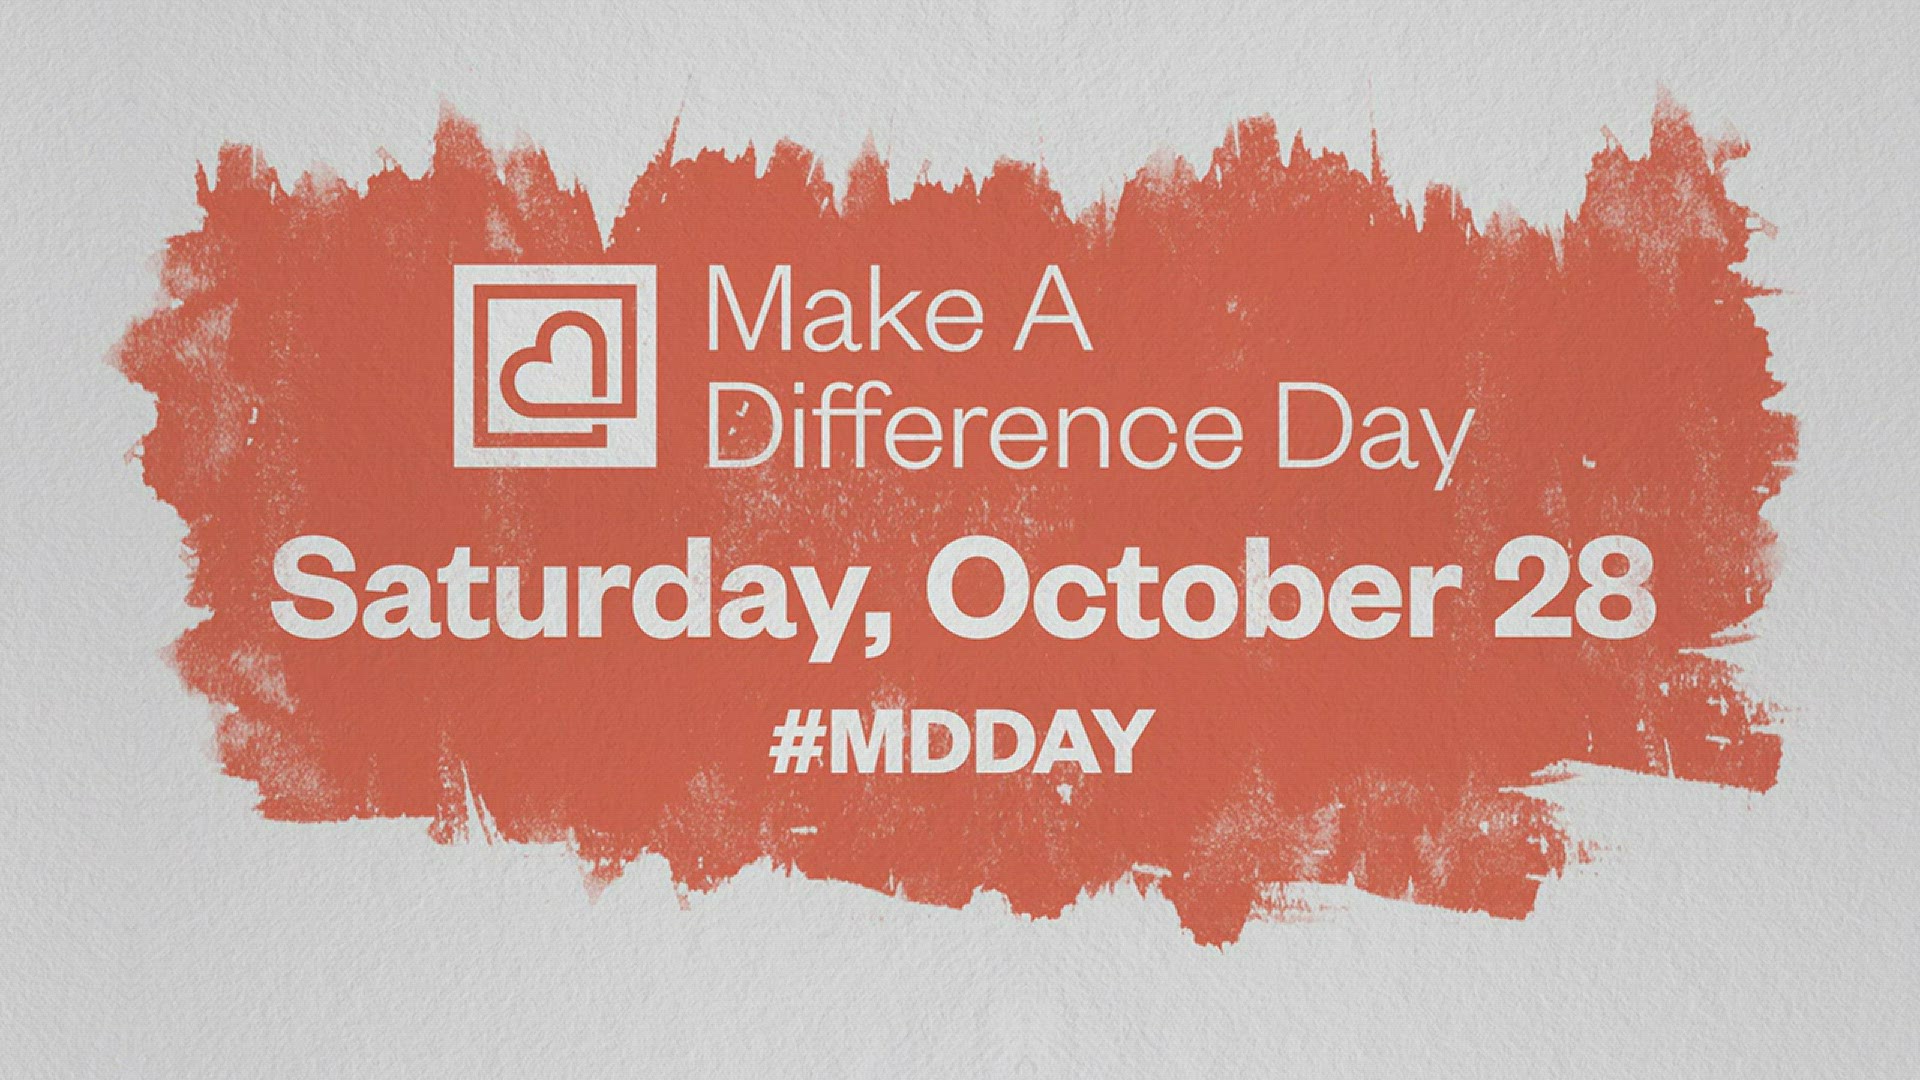 Make a Difference Day is Oct. 28. Sign up to volunteer at www.makeadifferenceday.com